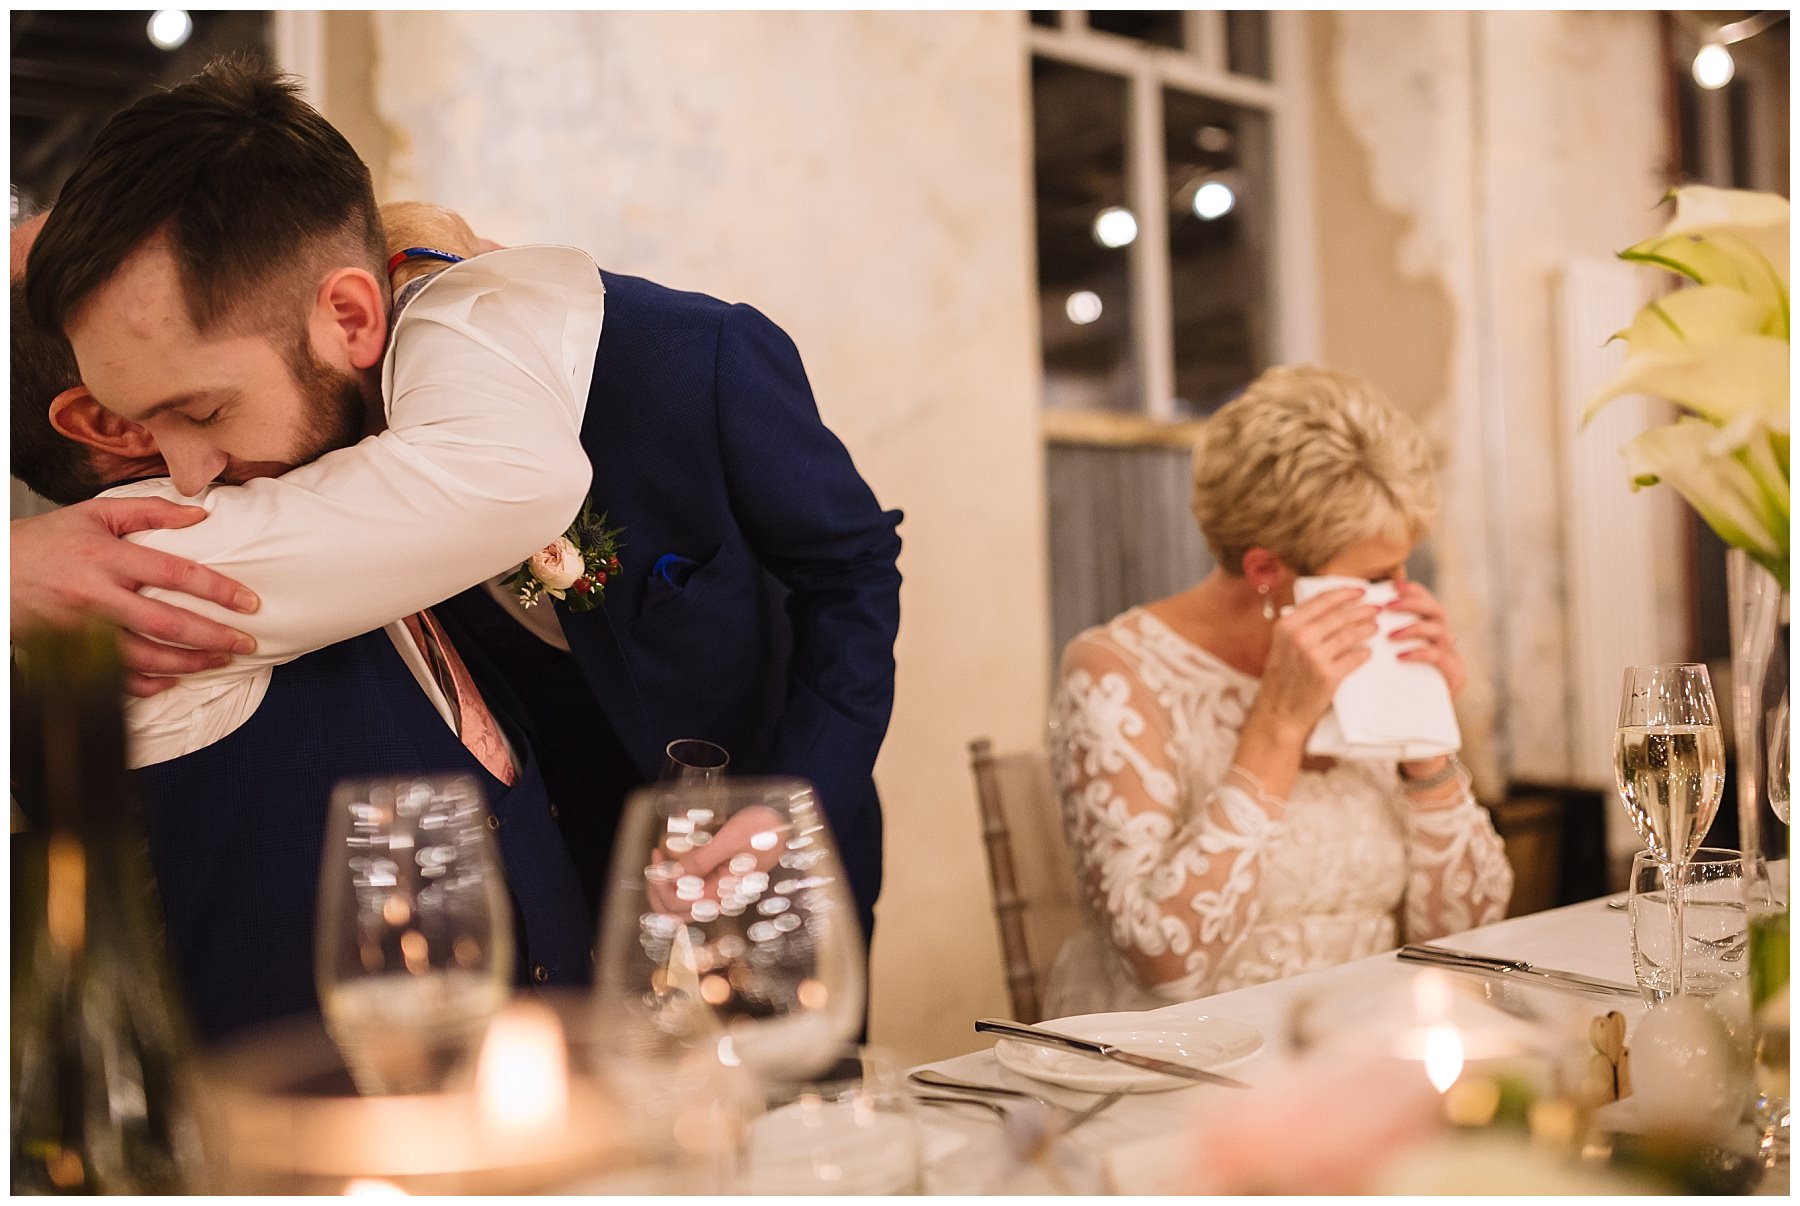 Son hugs dad while bride sheds a tear